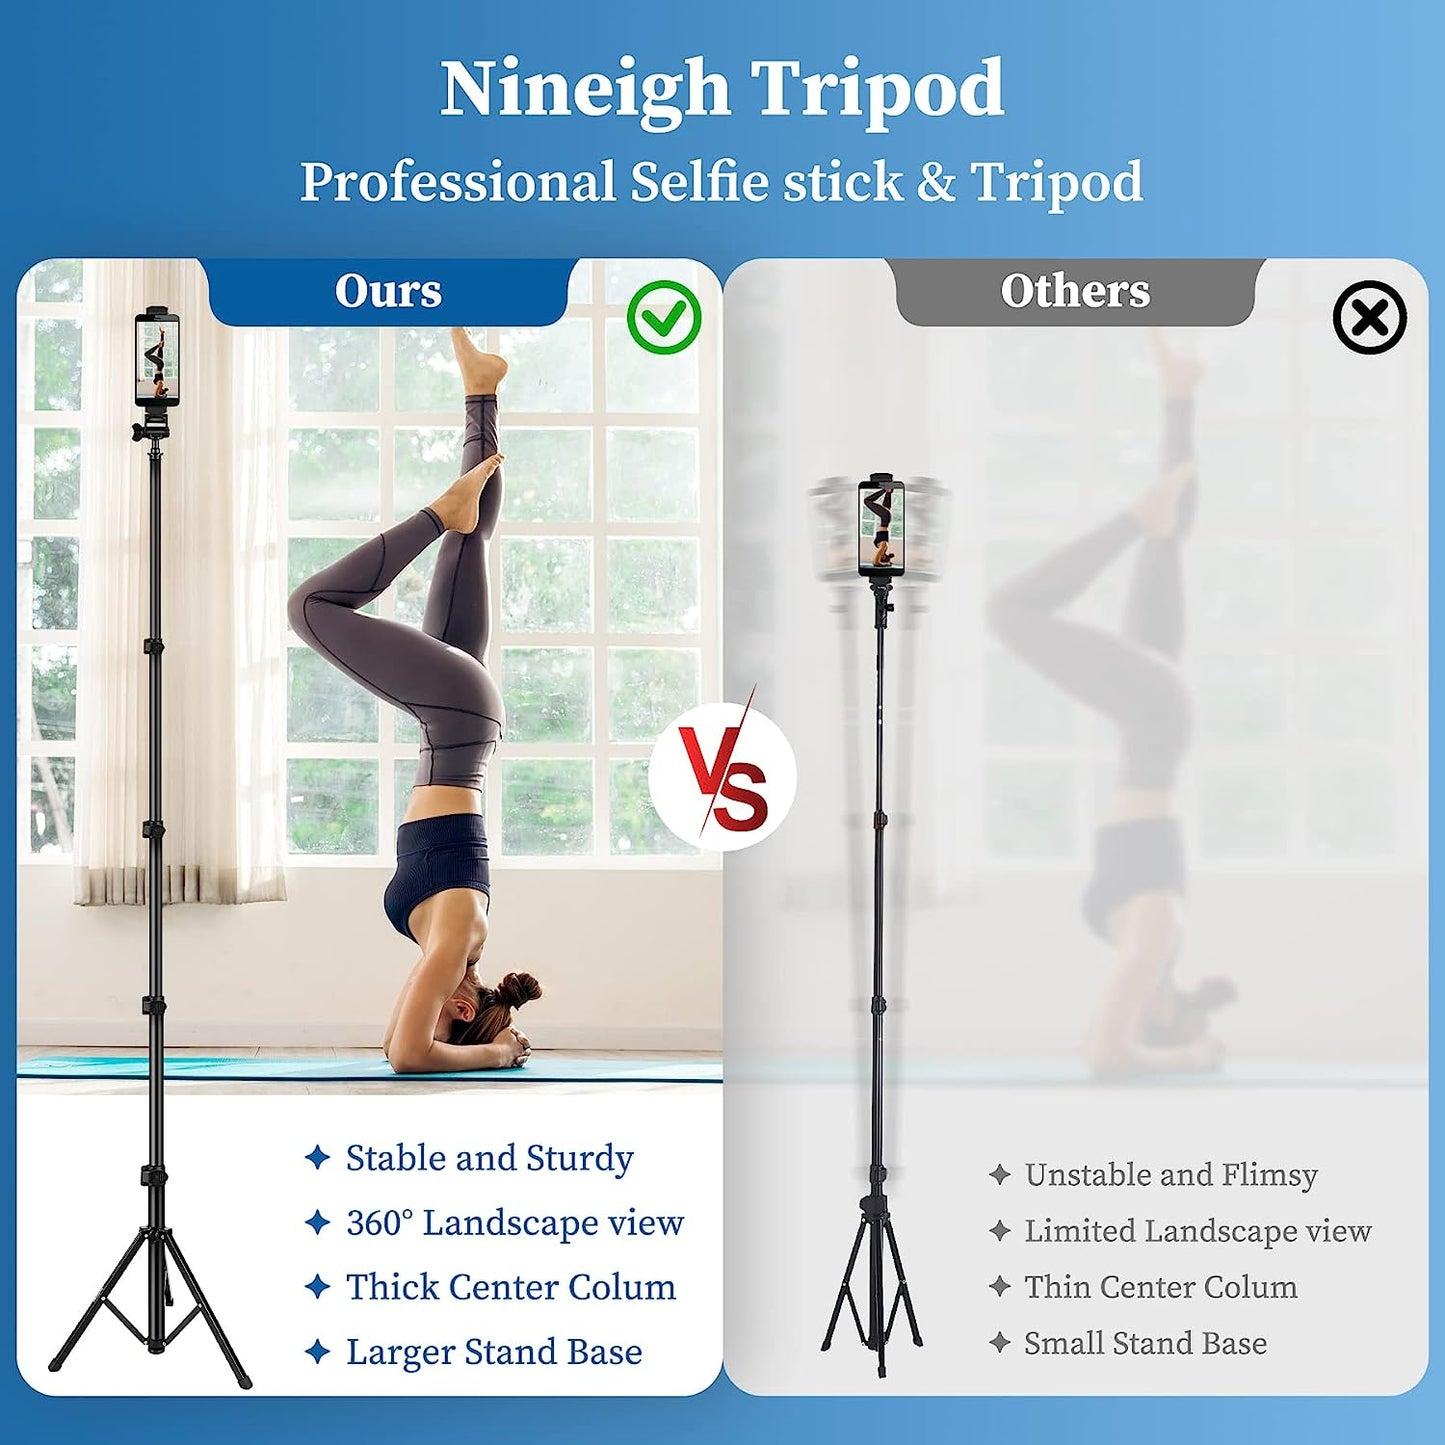 Phone Tripod Selfie Stick Tripods, 70" Cell Phone Tripod Stand with Remote/Phone Holder/Carry Bag, Aluminum Alloy Selfie Stick Tripod, Compatible with iPhone/Samsung/GoPro/Smartphone(USA)